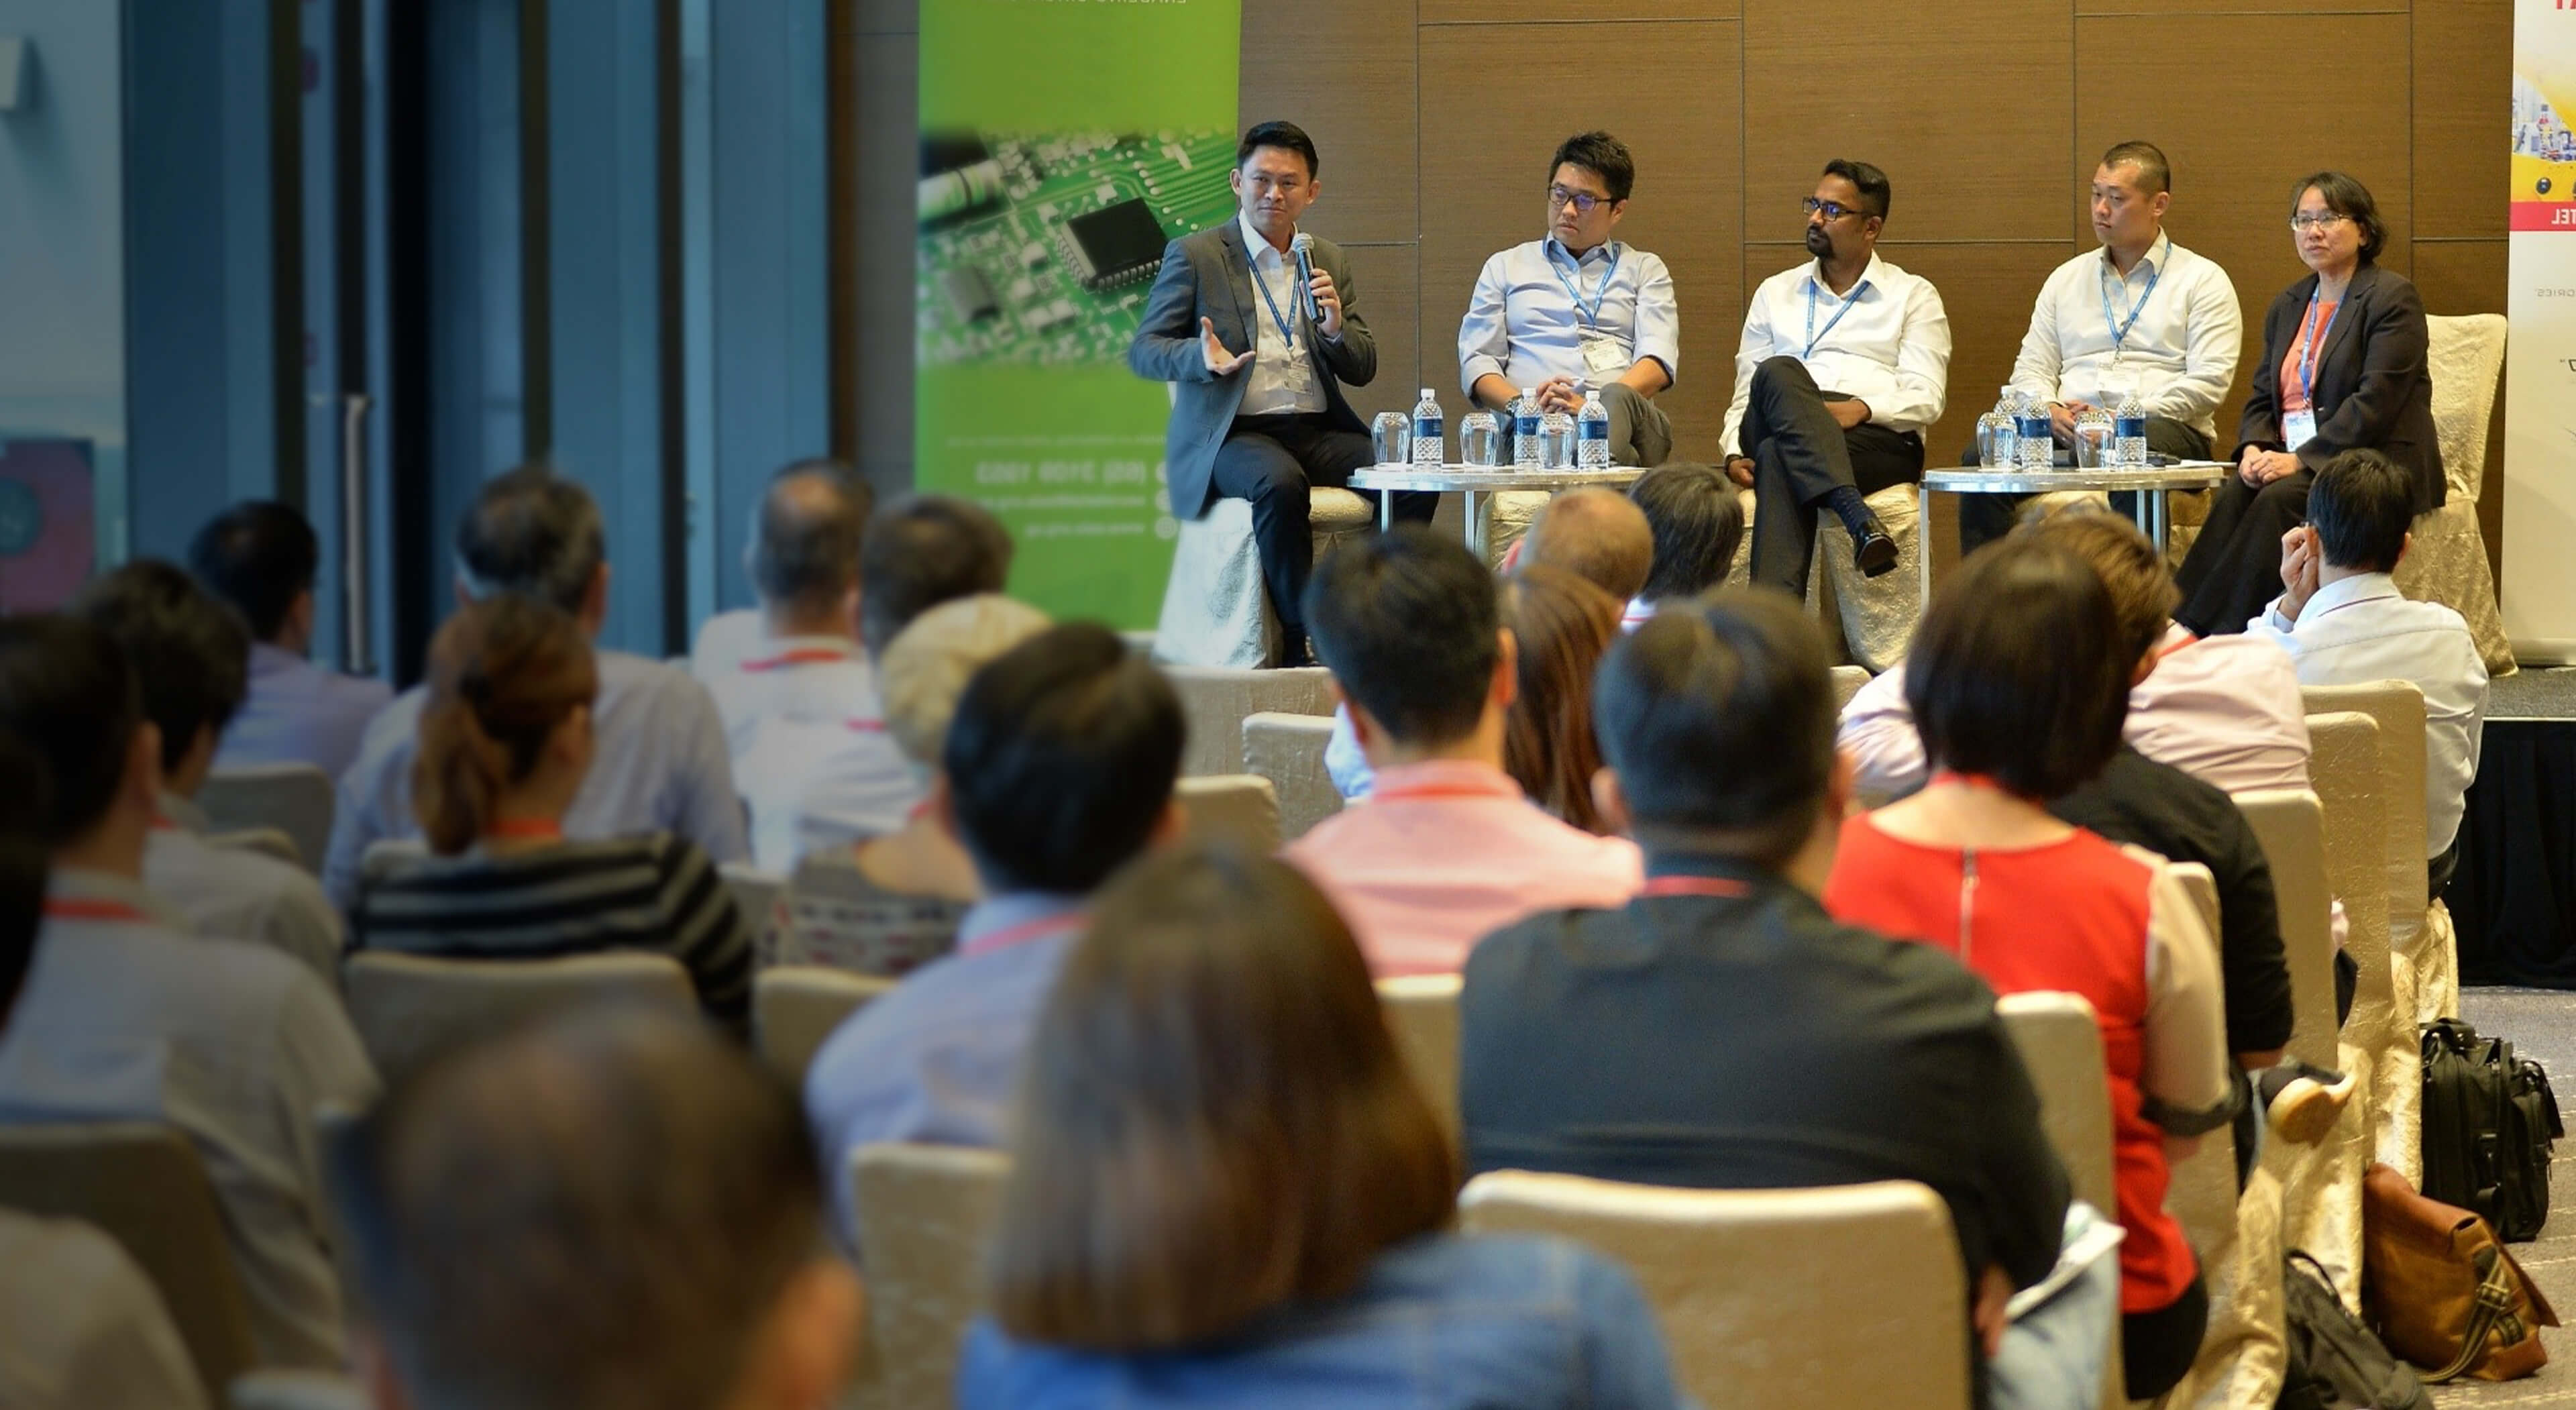 Speakers sharing about semiconductors at a conference